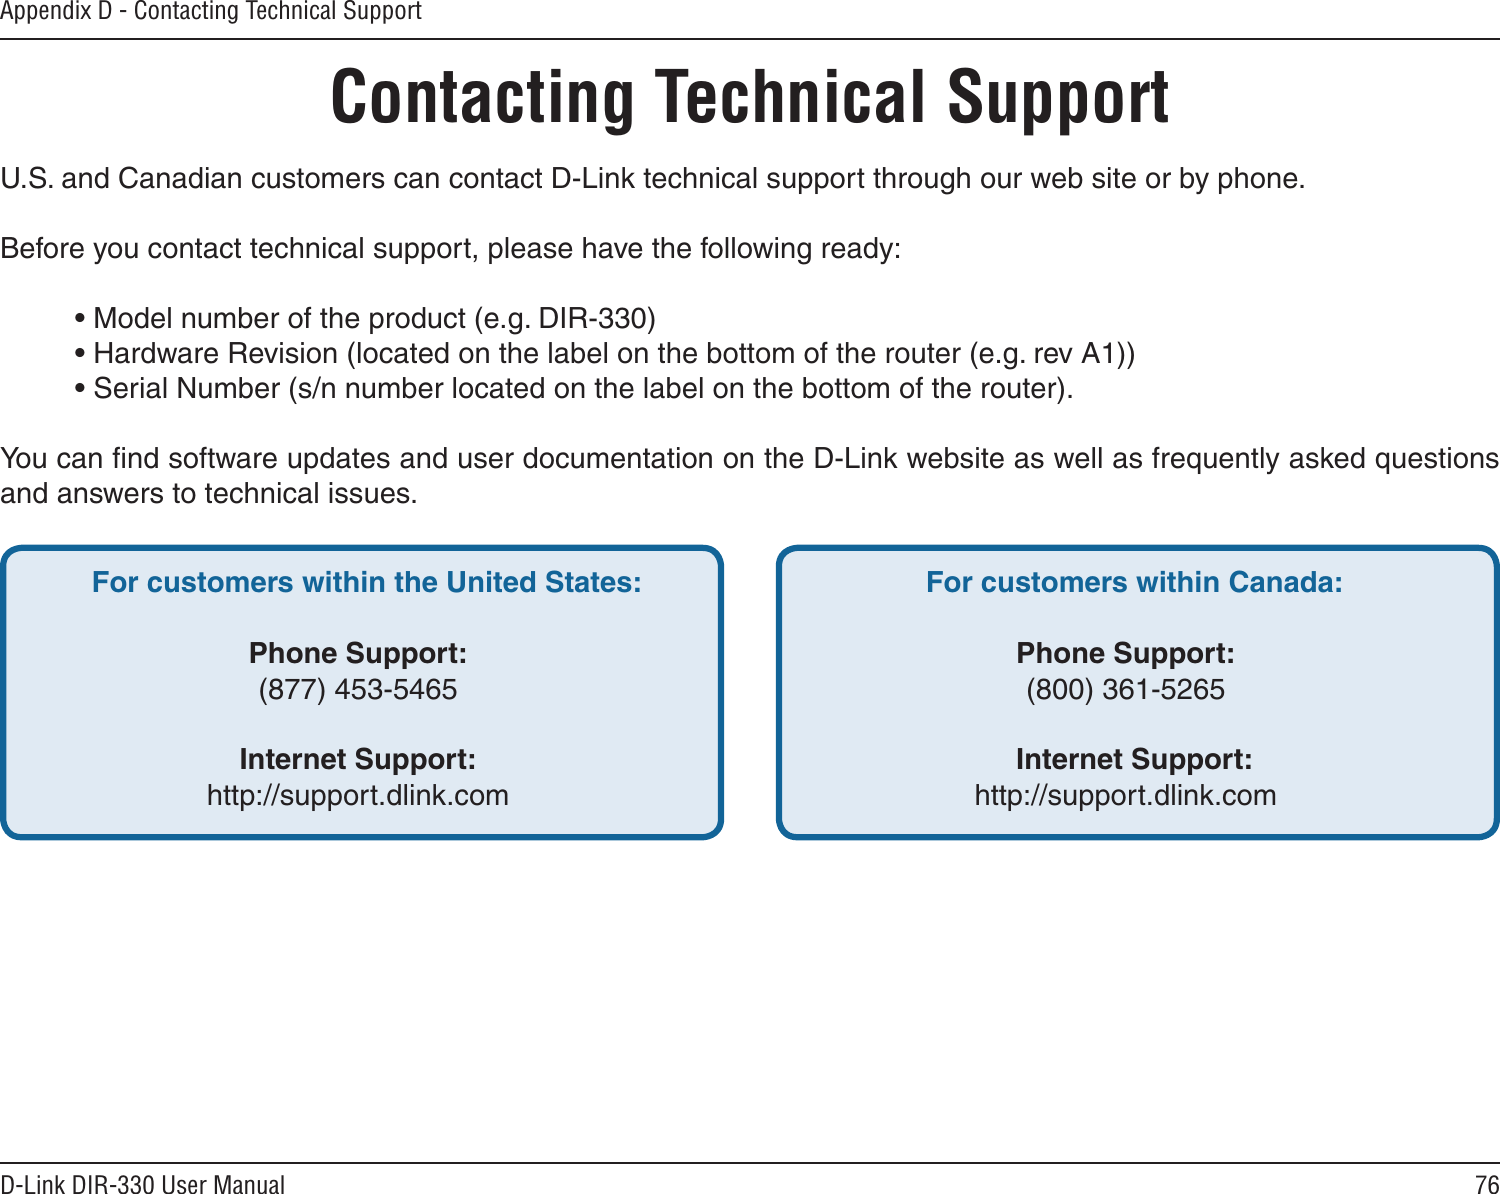 76D-Link DIR-330 User ManualAppendix D - Contacting Technical SupportContacting Technical SupportU.S. and Canadian customers can contact D-Link technical support through our web site or by phone.Before you contact technical support, please have the following ready:  • Model number of the product (e.g. DIR-330)  • Hardware Revision (located on the label on the bottom of the router (e.g. rev A1))  • Serial Number (s/n number located on the label on the bottom of the router). You can ﬁnd software updates and user documentation on the D-Link website as well as frequently asked questions and answers to technical issues.For customers within the United States: Phone Support:(877) 453-5465Internet Support:http://support.dlink.com For customers within Canada: Phone Support:(800) 361-5265  Internet Support:http://support.dlink.com